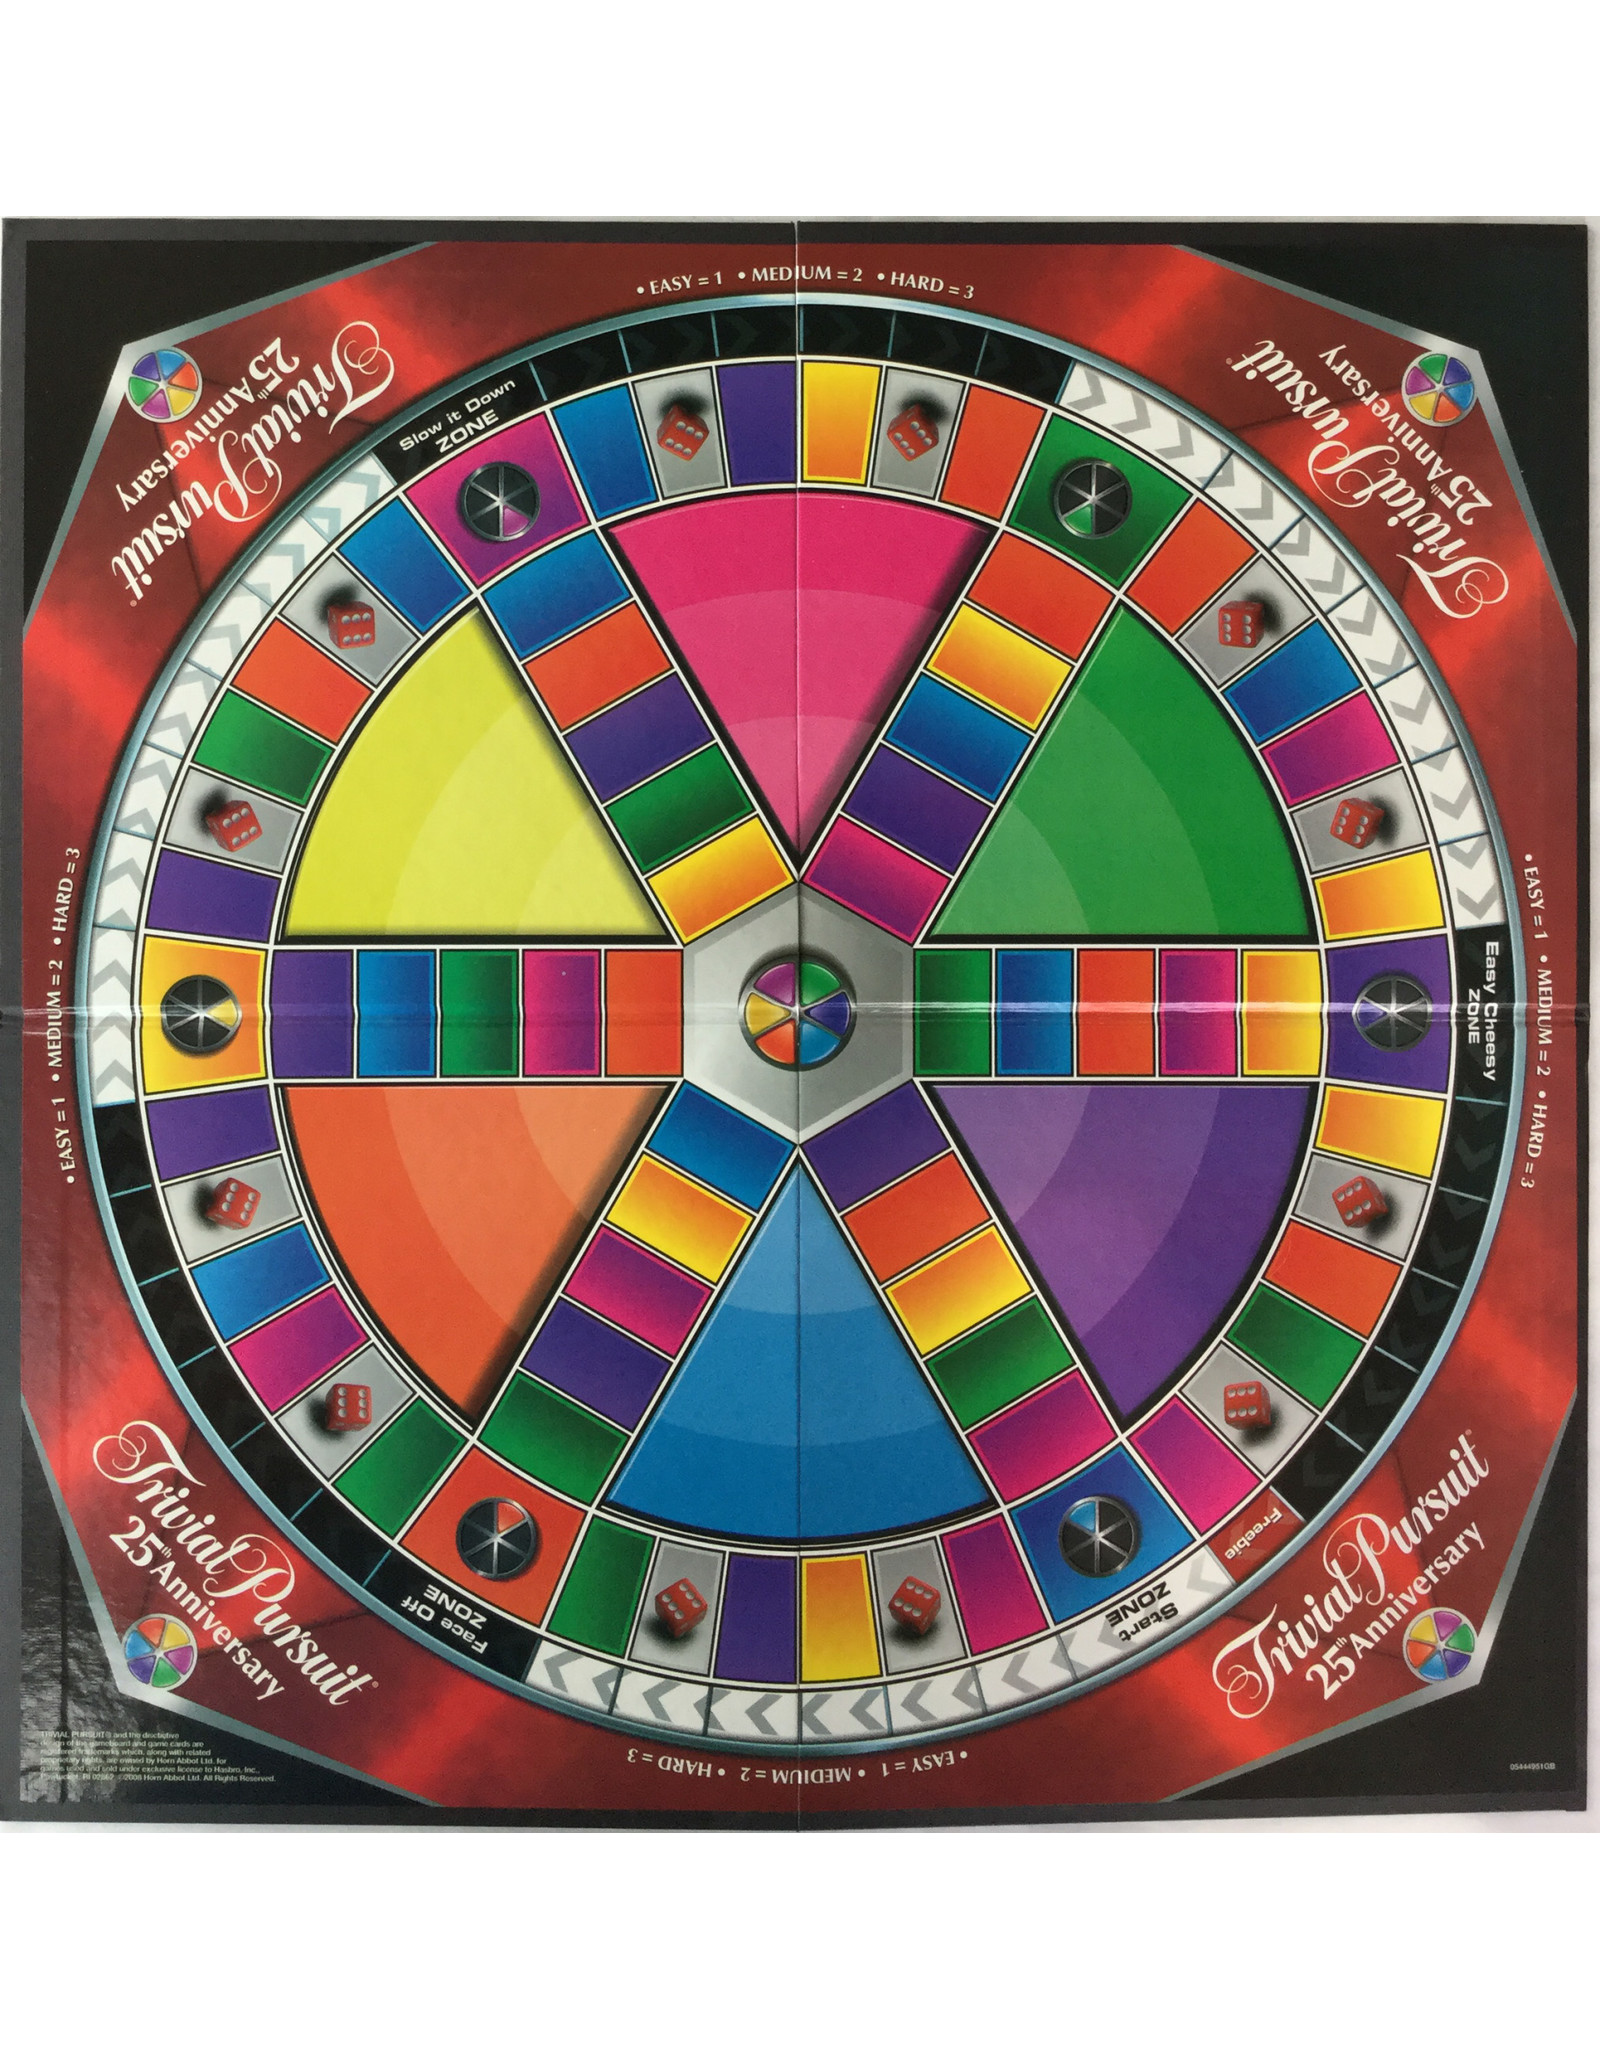 PARKER BROTHERS Trivial Pursuit 25th Anniversary Edition